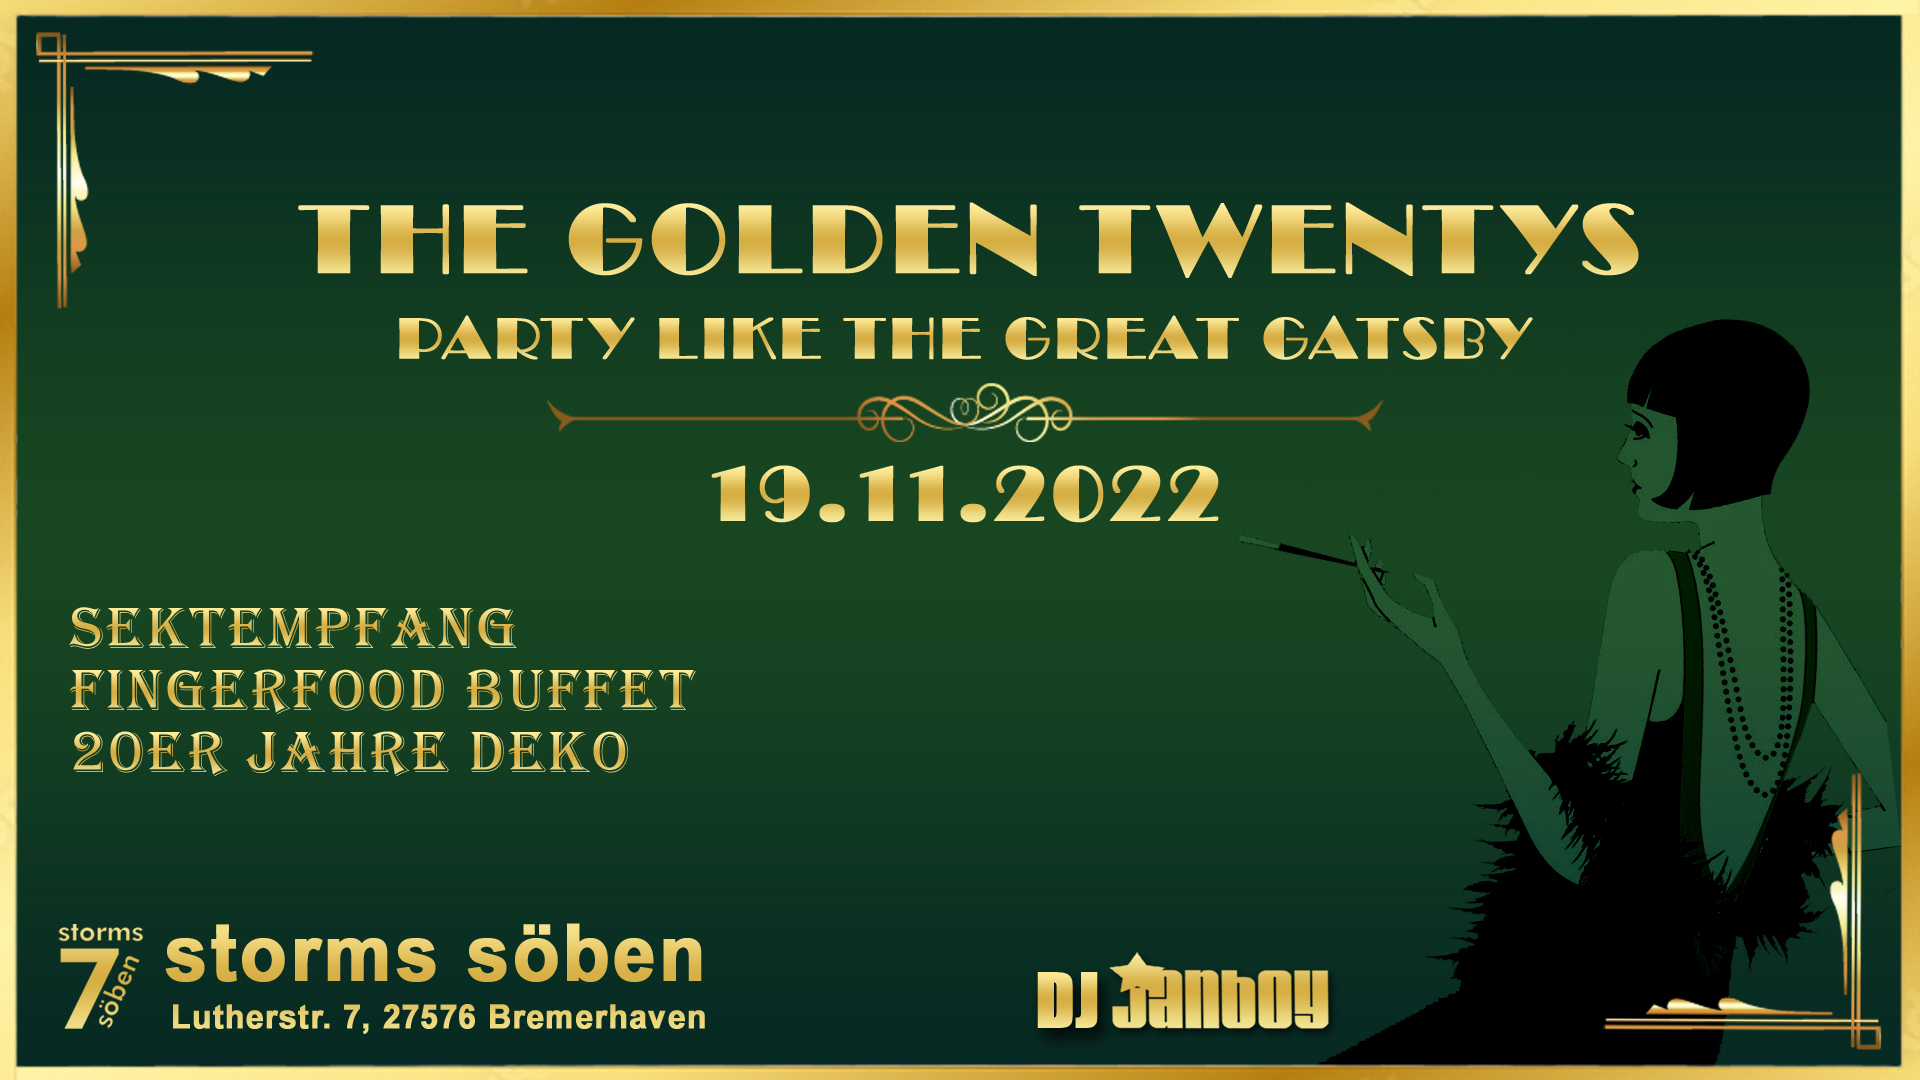 The golden twentys - Party like the great Gatsby